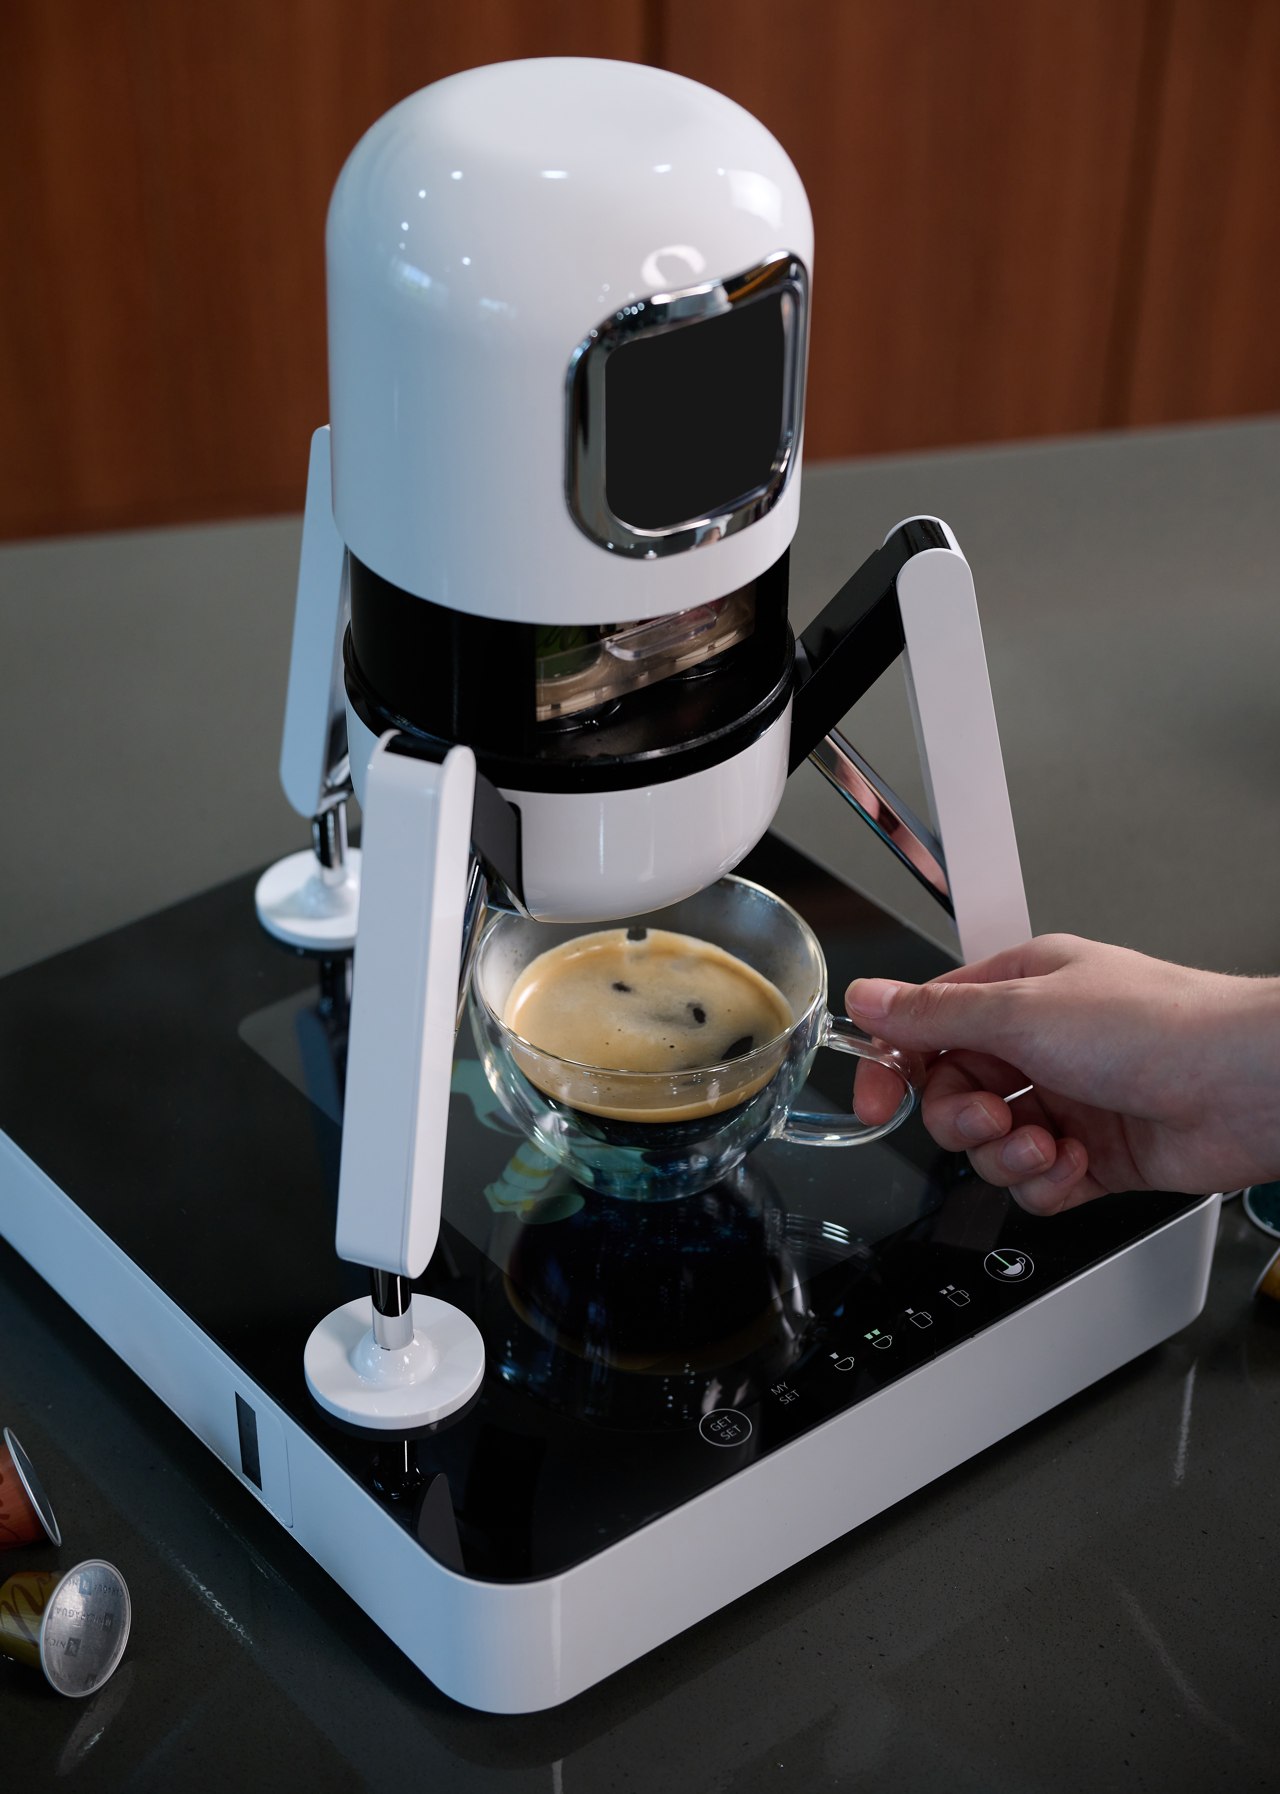 https://www.yankodesign.com/images/design_news/2023/07/coffee_machine_uses_two_pods_for_nuanced_flavor_2.jpg